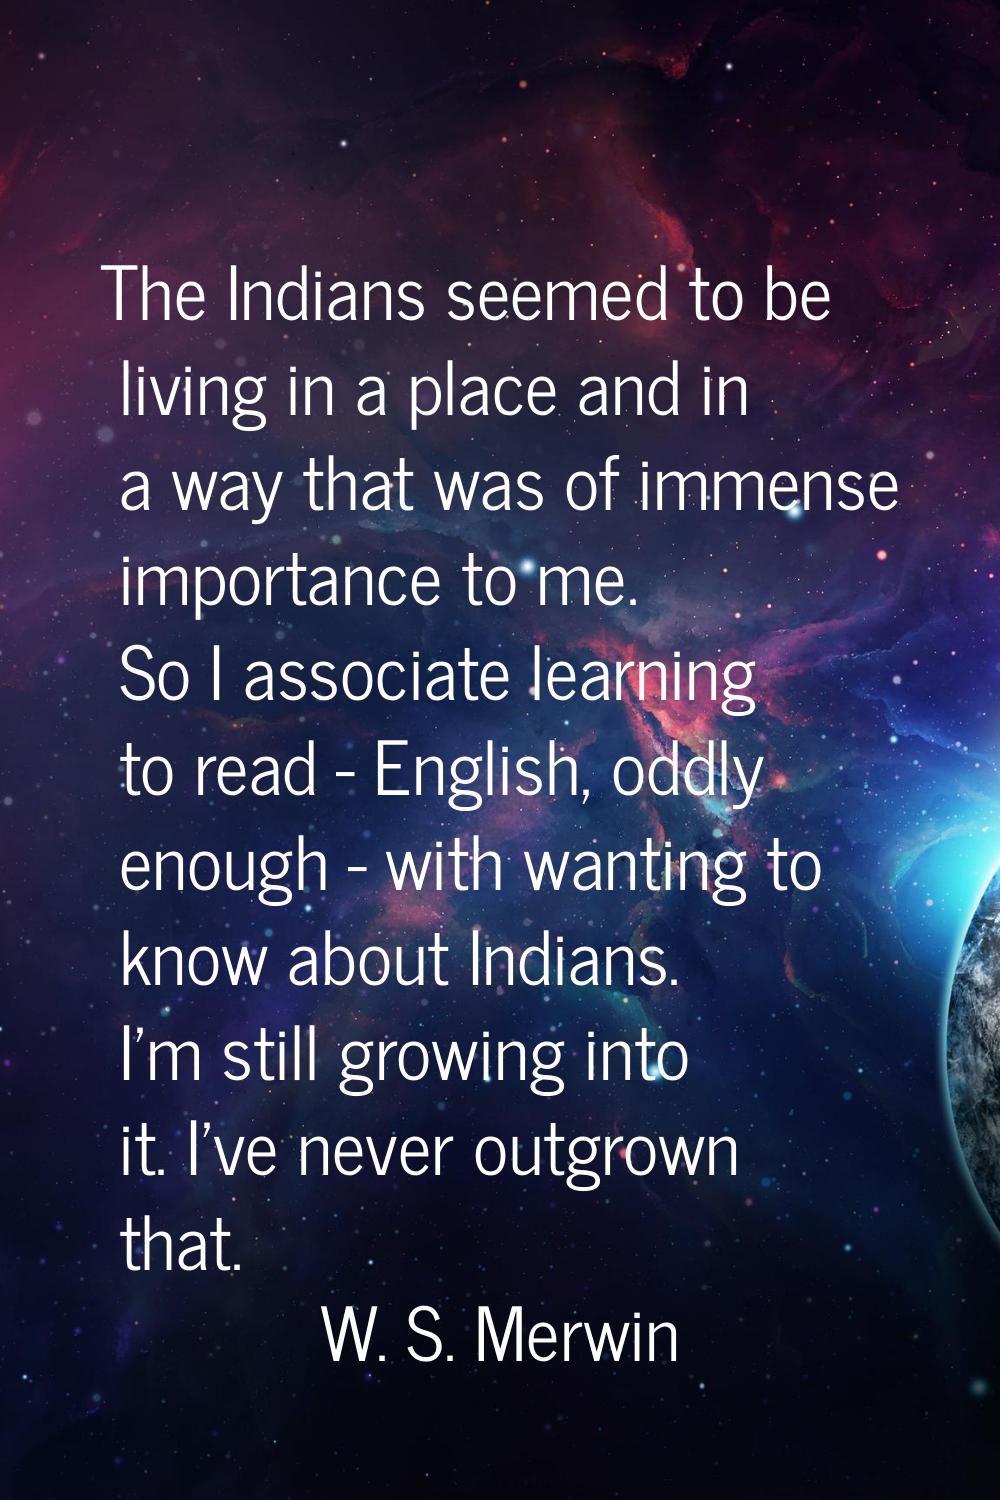 The Indians seemed to be living in a place and in a way that was of immense importance to me. So I 